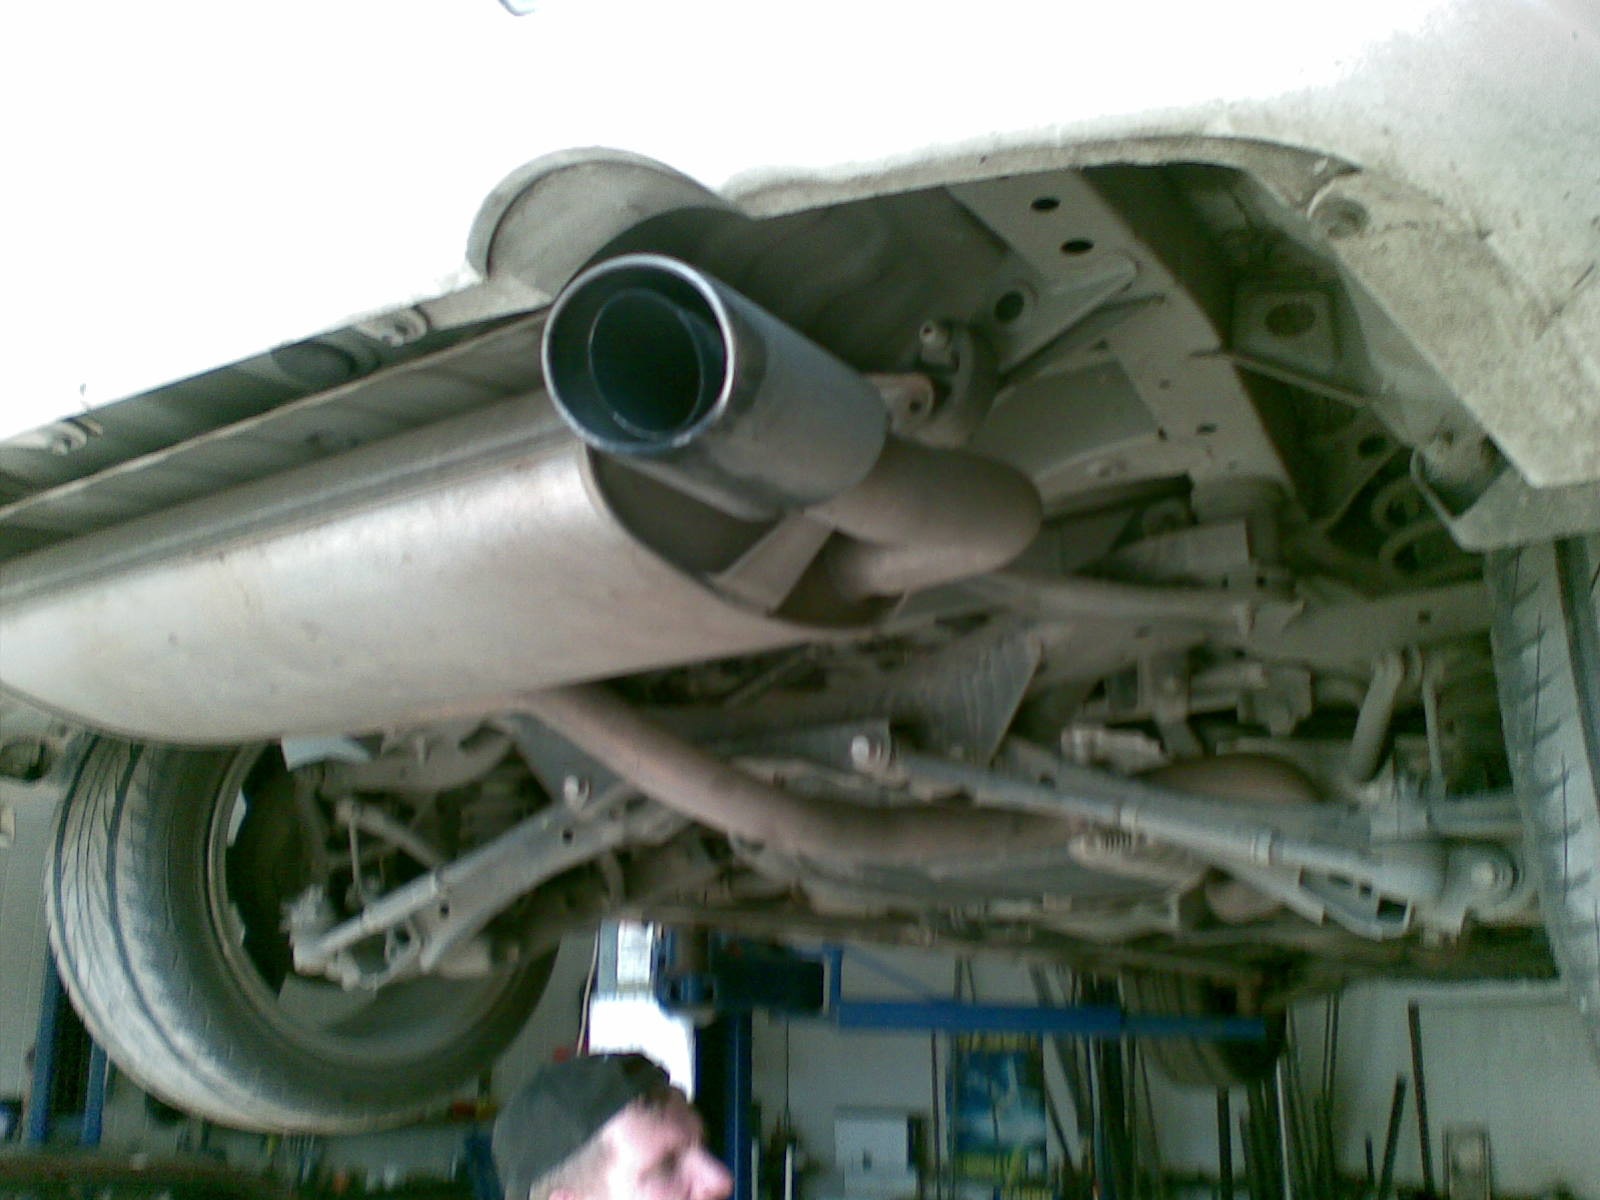 For a peculiar aesthetics and muffled sound instead of the standard muffler I installed a mg-race sports exhaust - Toyota Caldina 20 l 2005